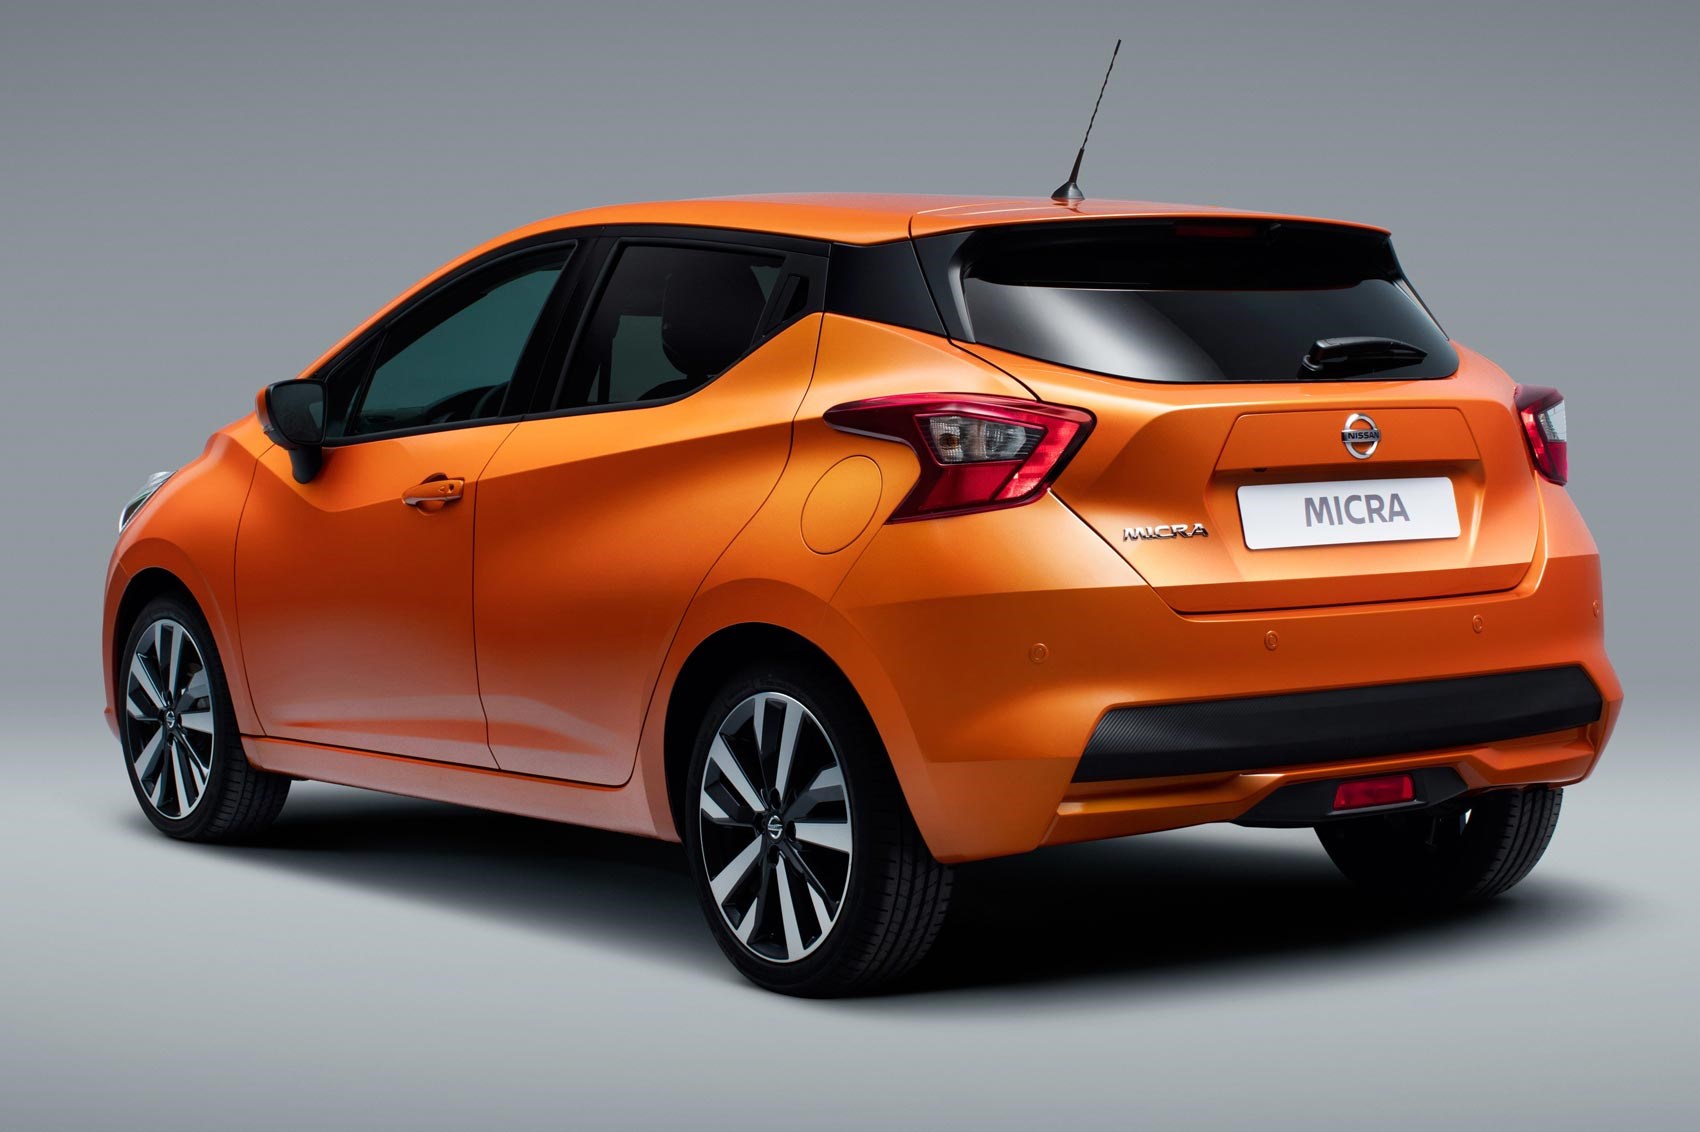 Boring to bold: next-gen 2017 Nissan Micra unveiled